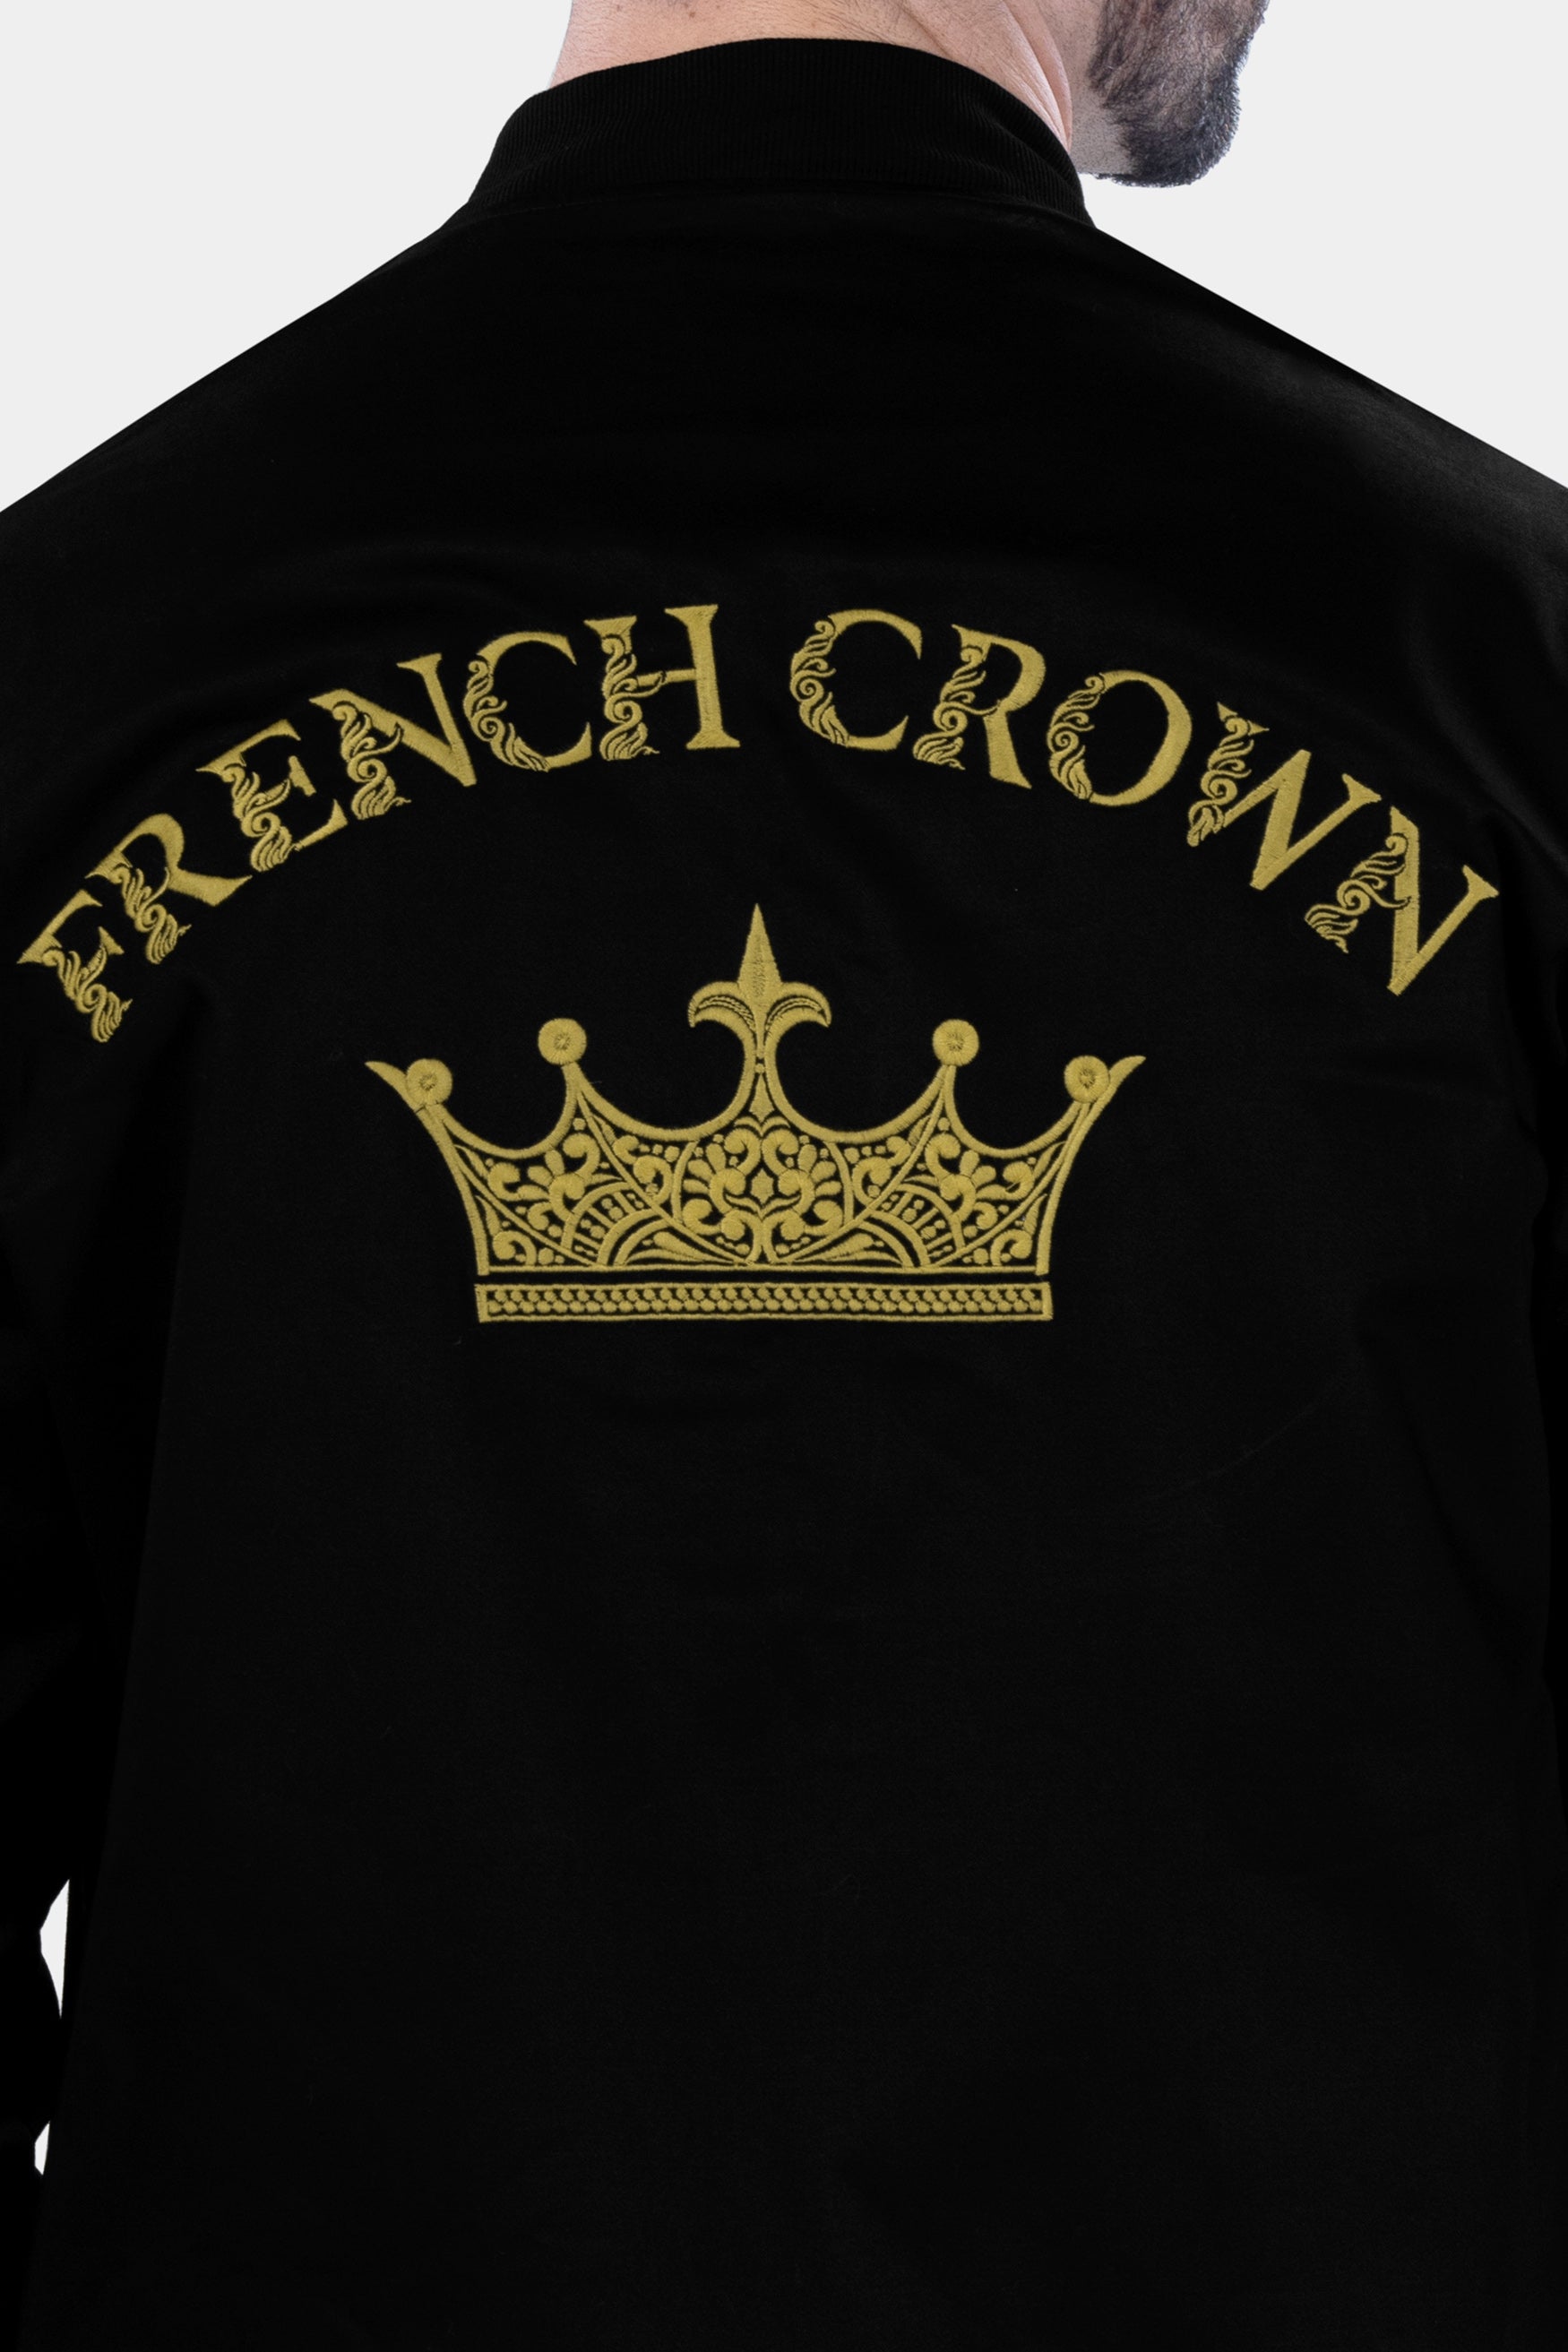 Jade Black French Crown Embroidered Premium Cotton Bomber Jacket